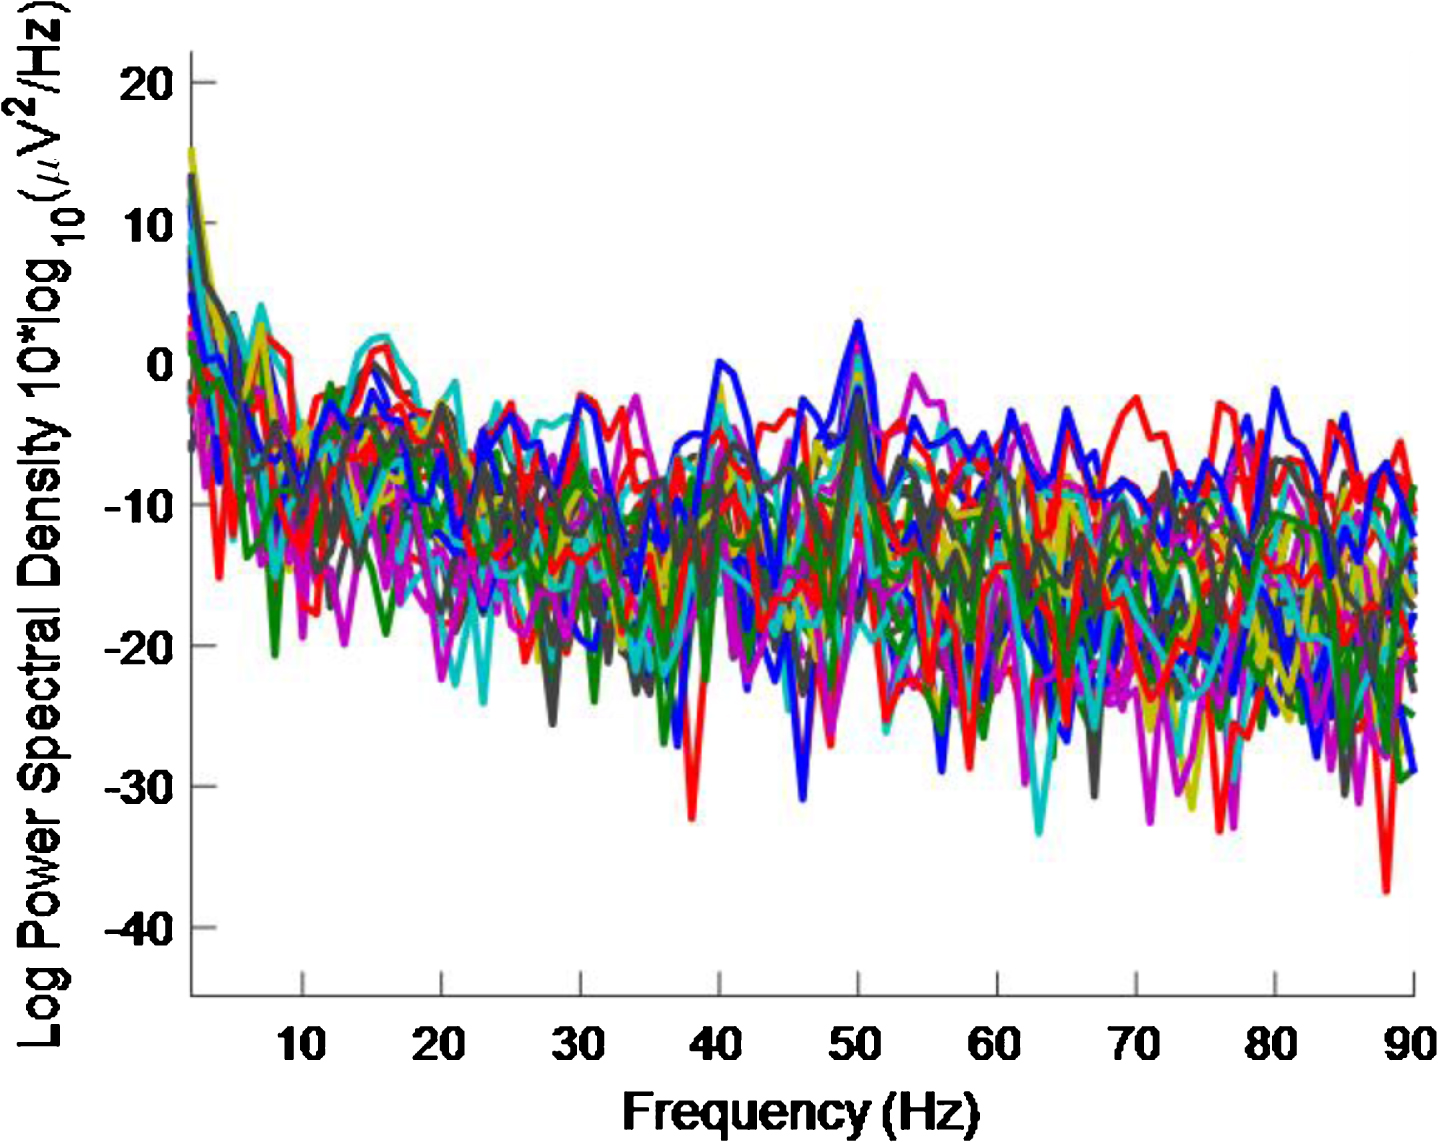 PSD for high intensity 40 Hz stimulus for healthy volunteer 3 using the first 2 s of data. The plot is noisy and it is difficult to see a 40 Hz response.